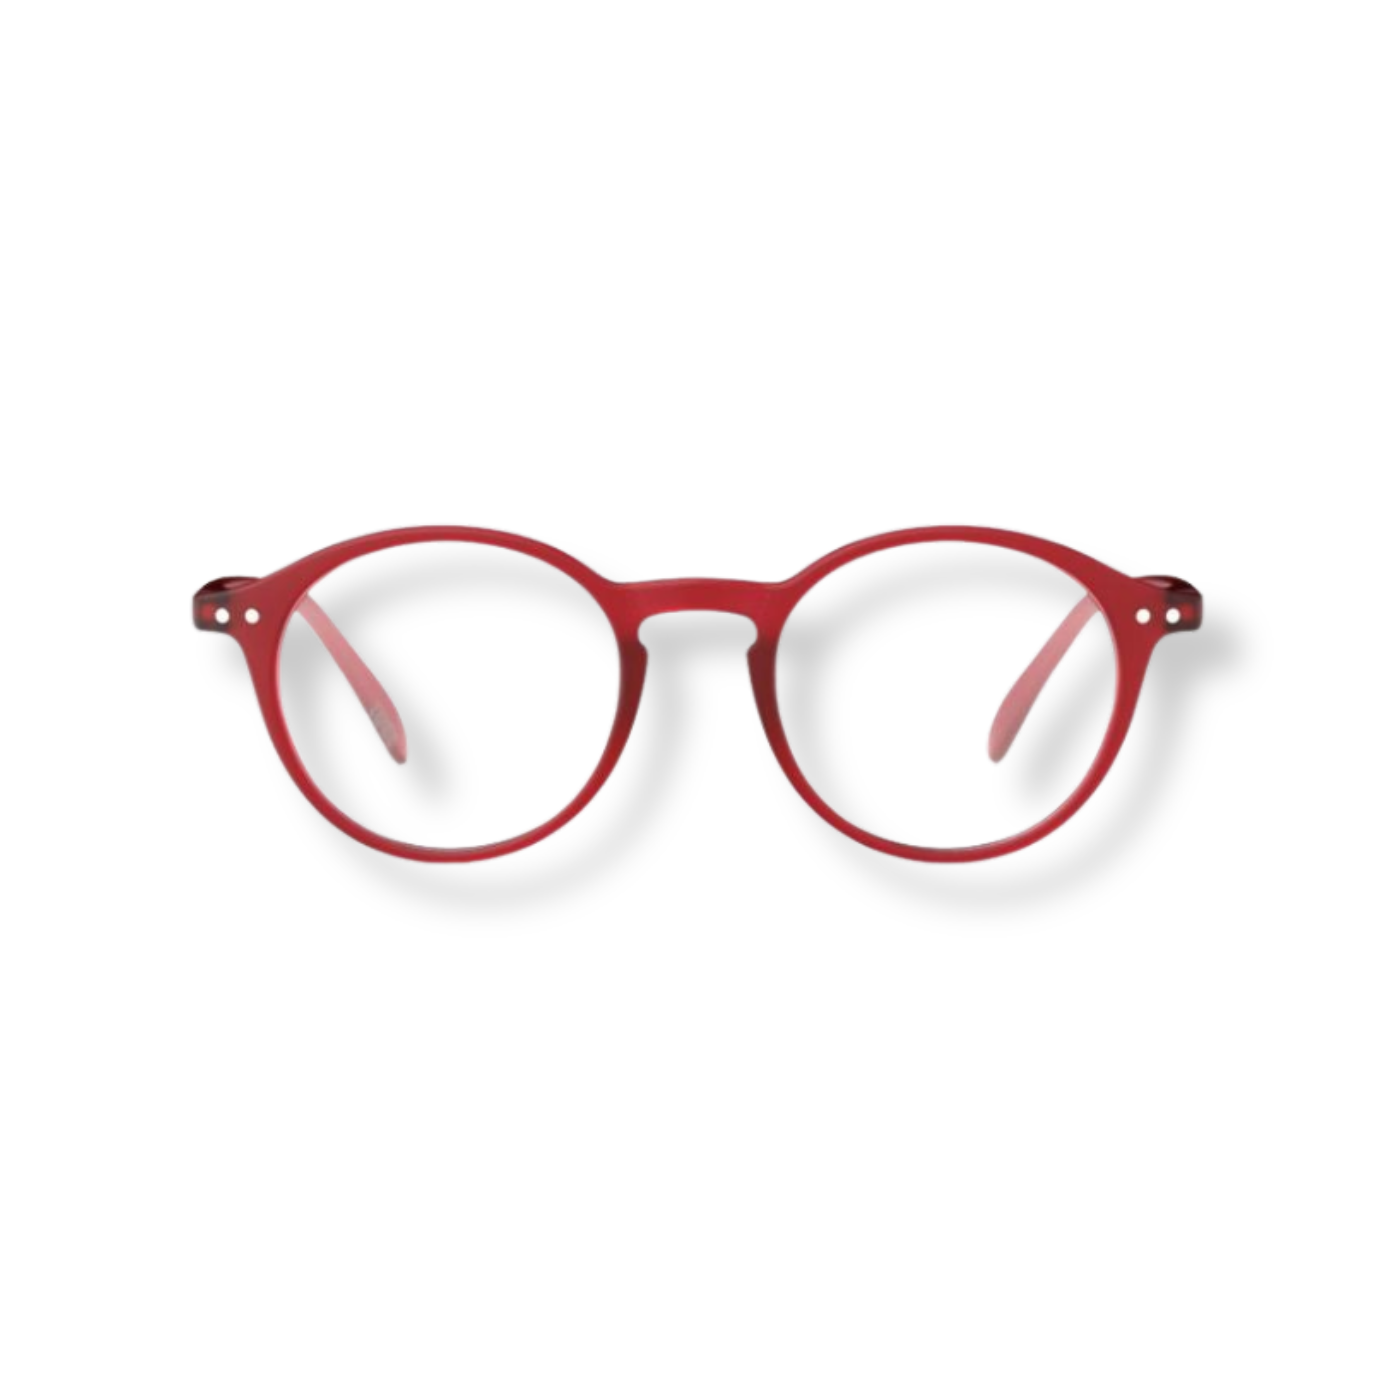 Round reading glasses with a red frame.